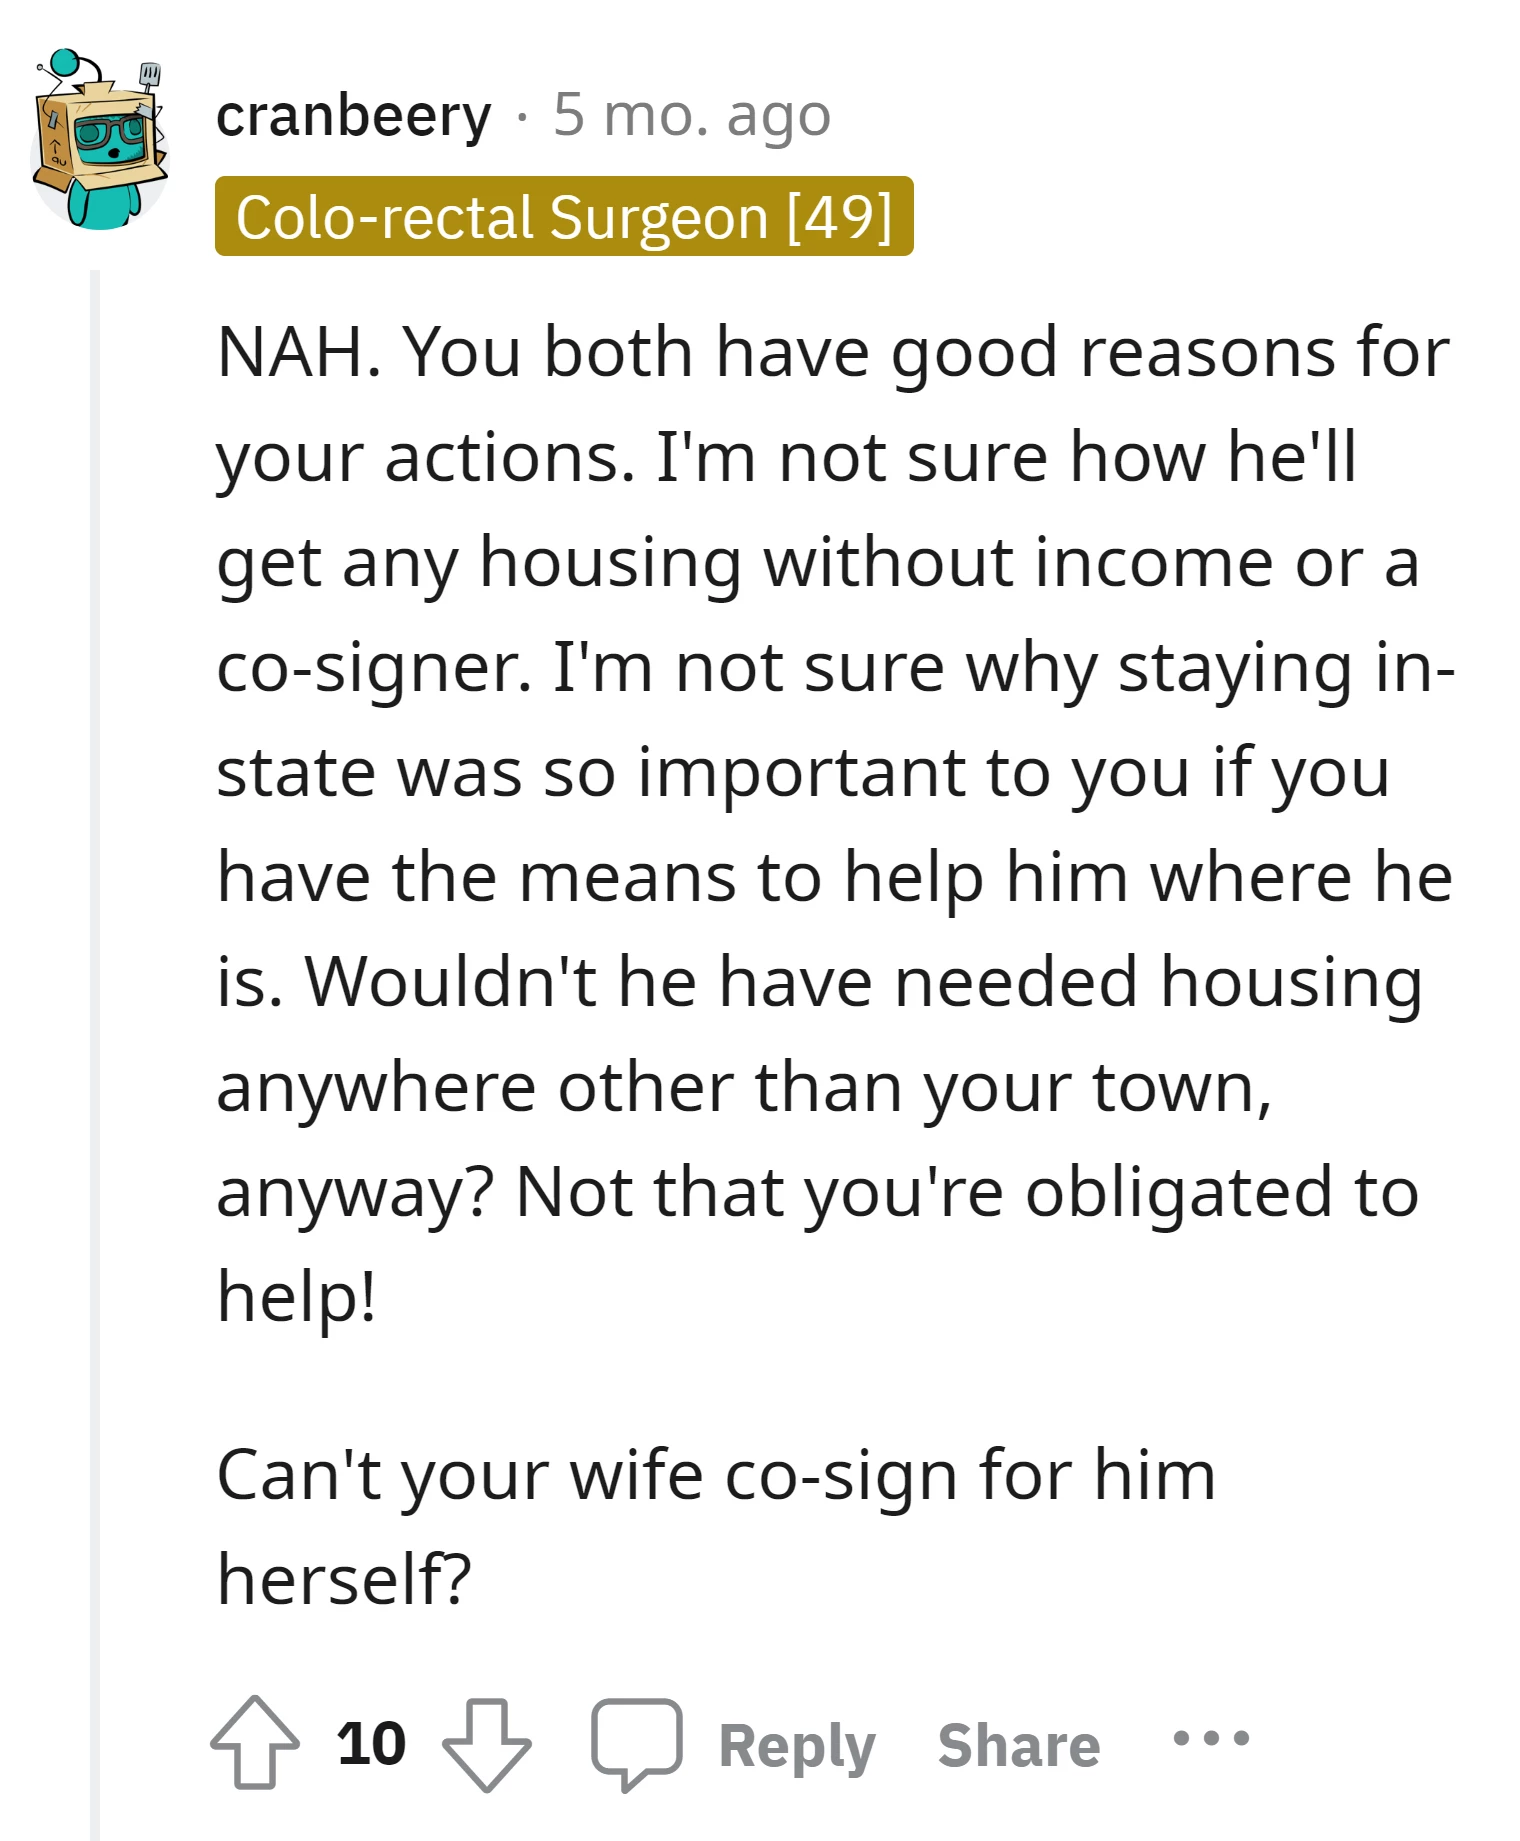 Both the OP and the son as having valid reasons